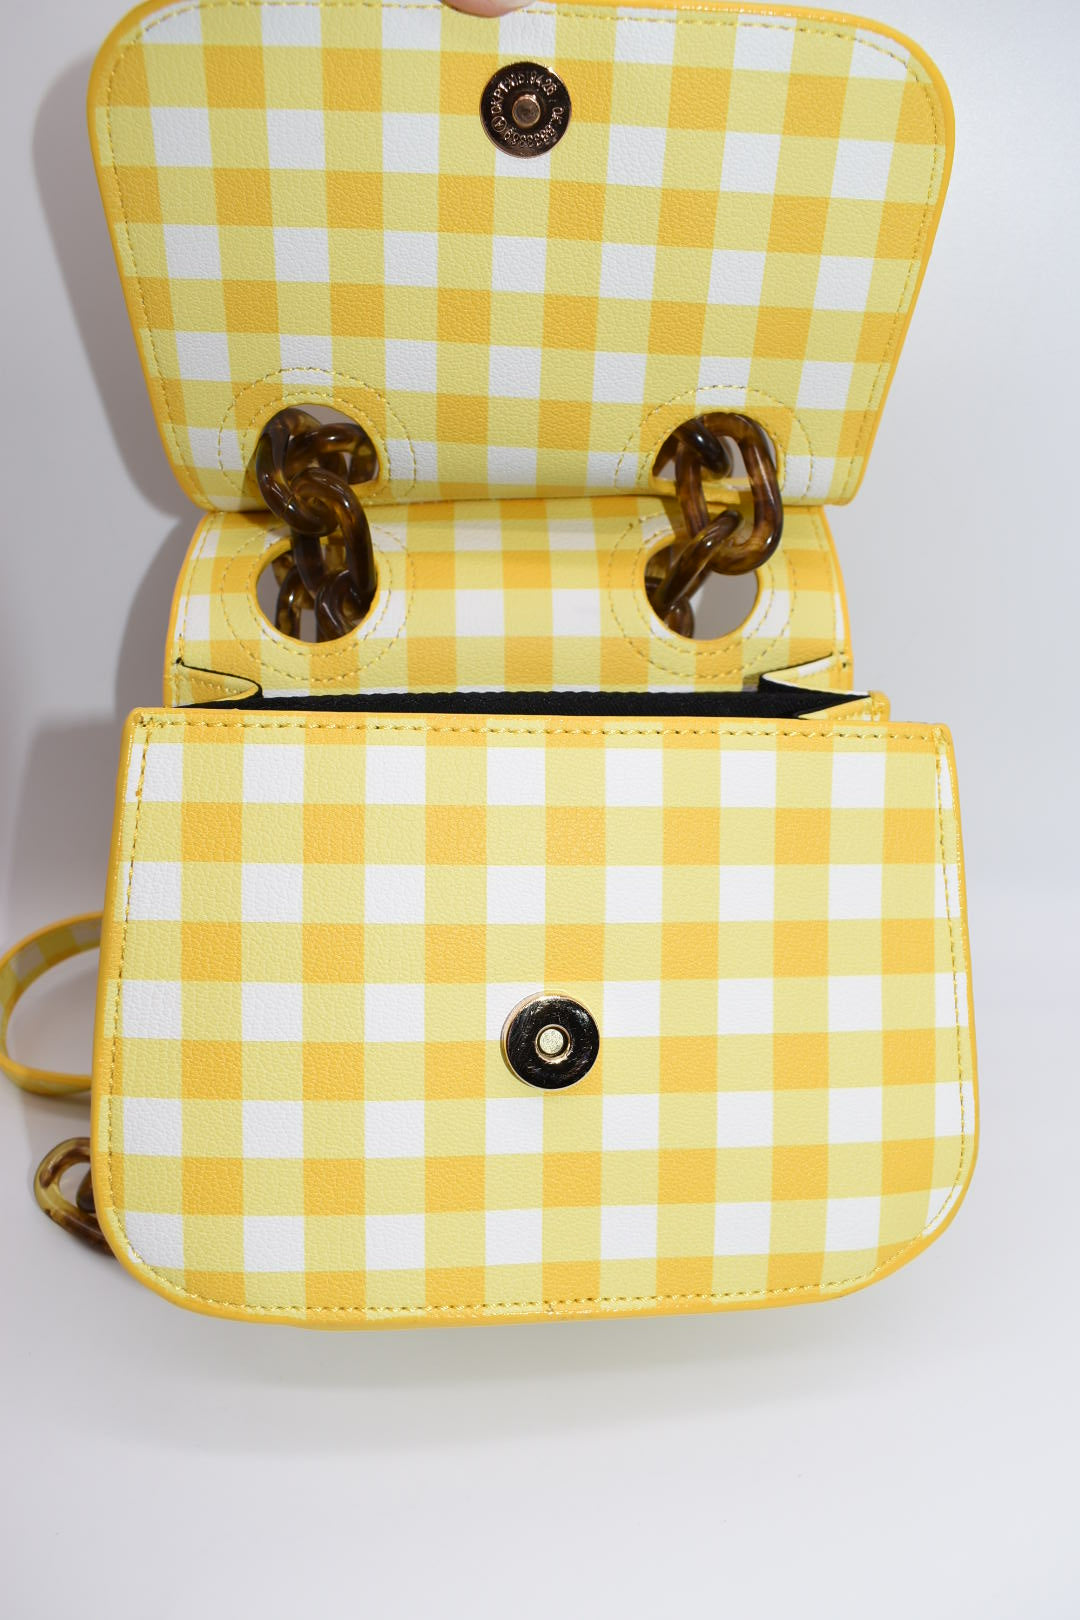 HOUSE OF WANT We Are Original Shoulder Bag in Yellow Gingham